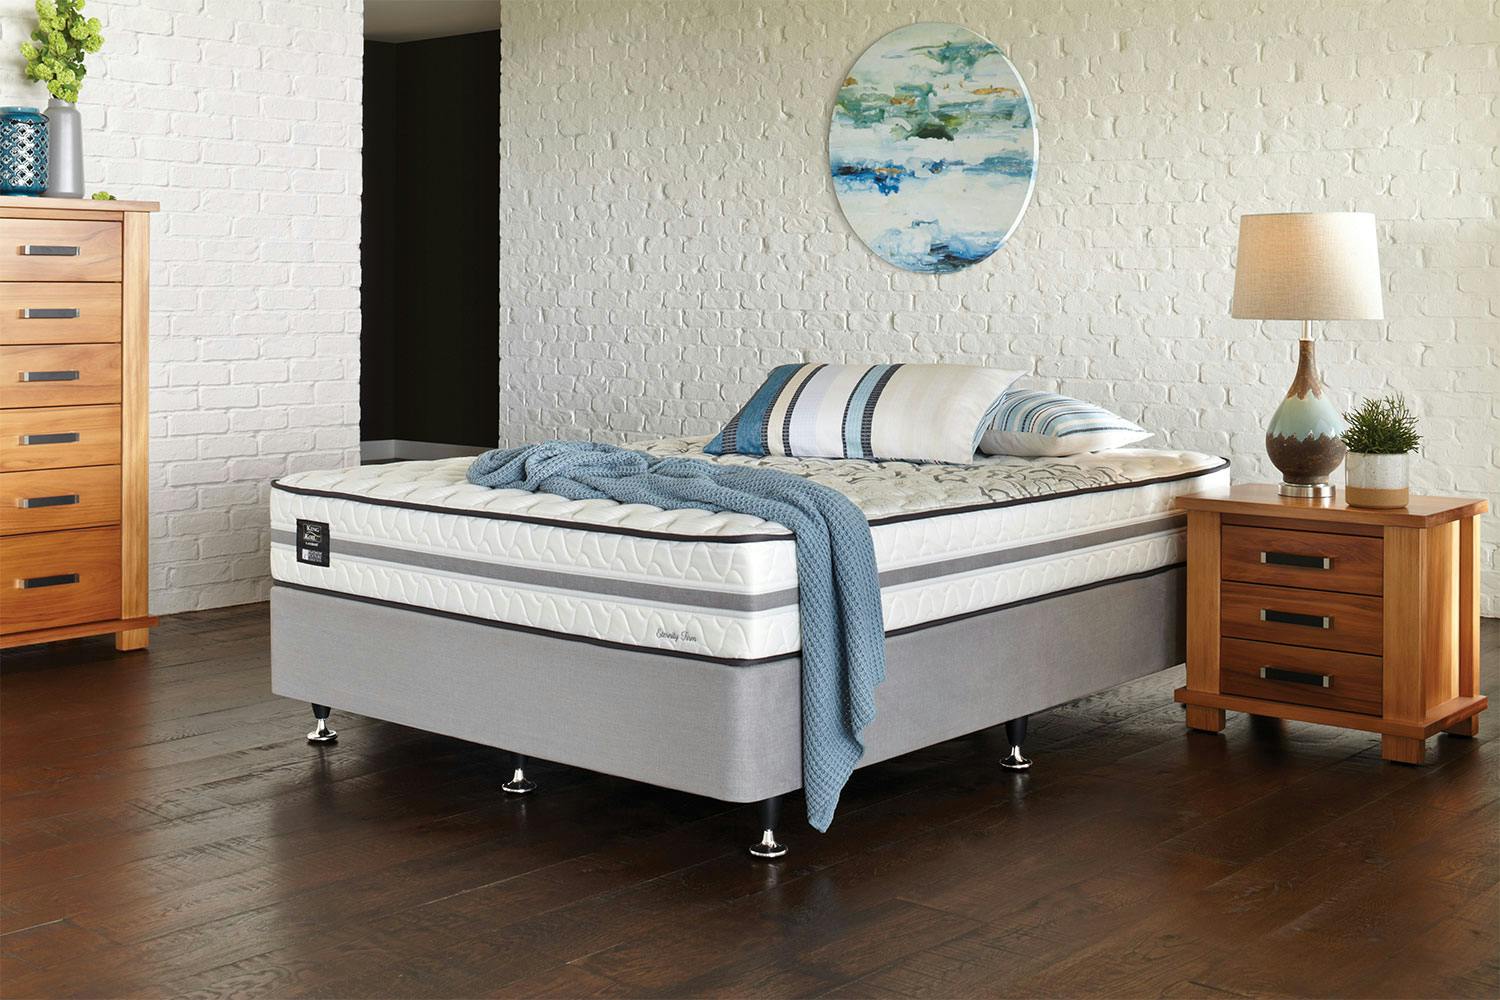 Eternity Firm Queen Bed By King Koil Harvey Norman New Zealand